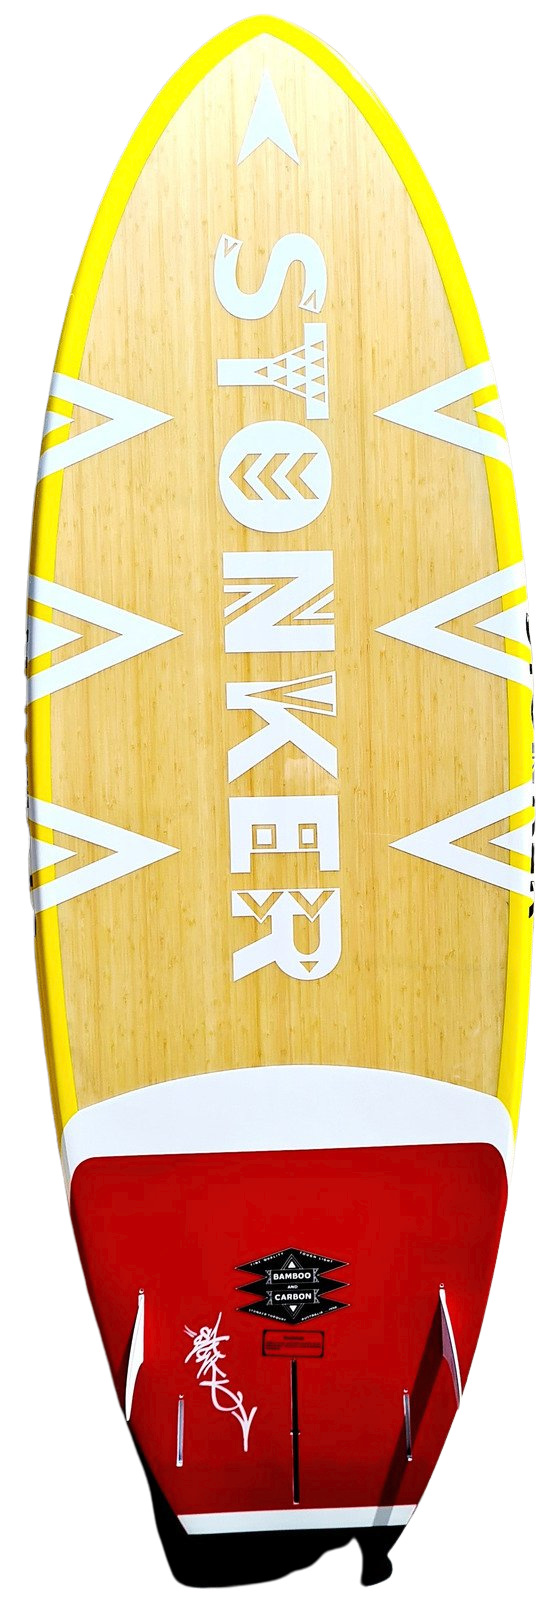 Stonker 9'0" x 32" 147L Bamboo Carbon SUP